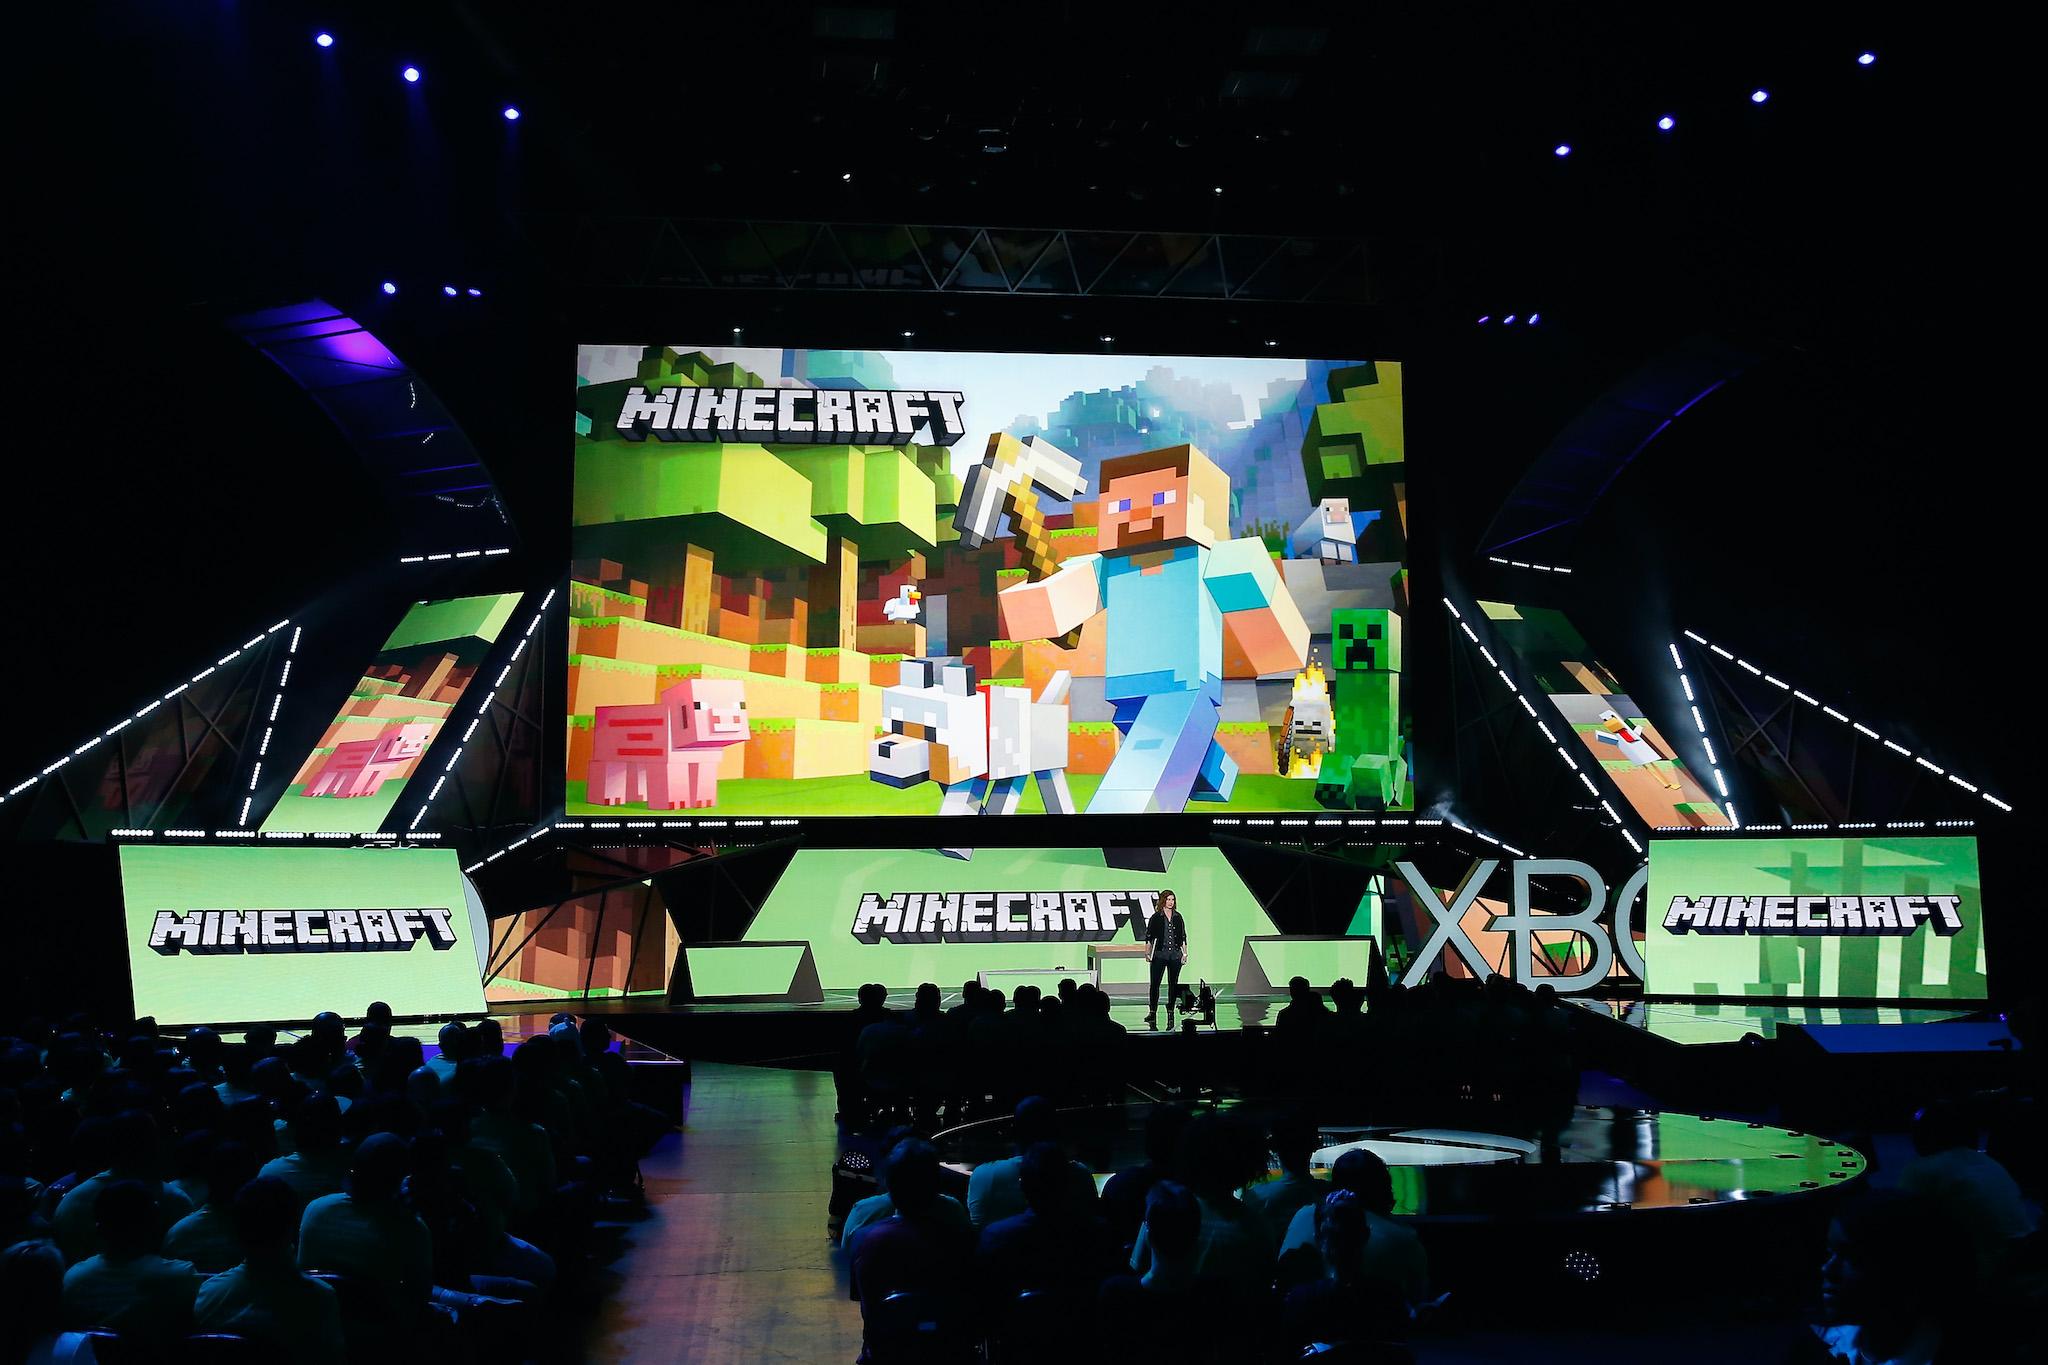 Is Minecraft Shutting Down Rumours About Servers Being Switched Off Spark Panic Among Players The Independent The Independent - event how to get 3 free roblox skins roblox nike event